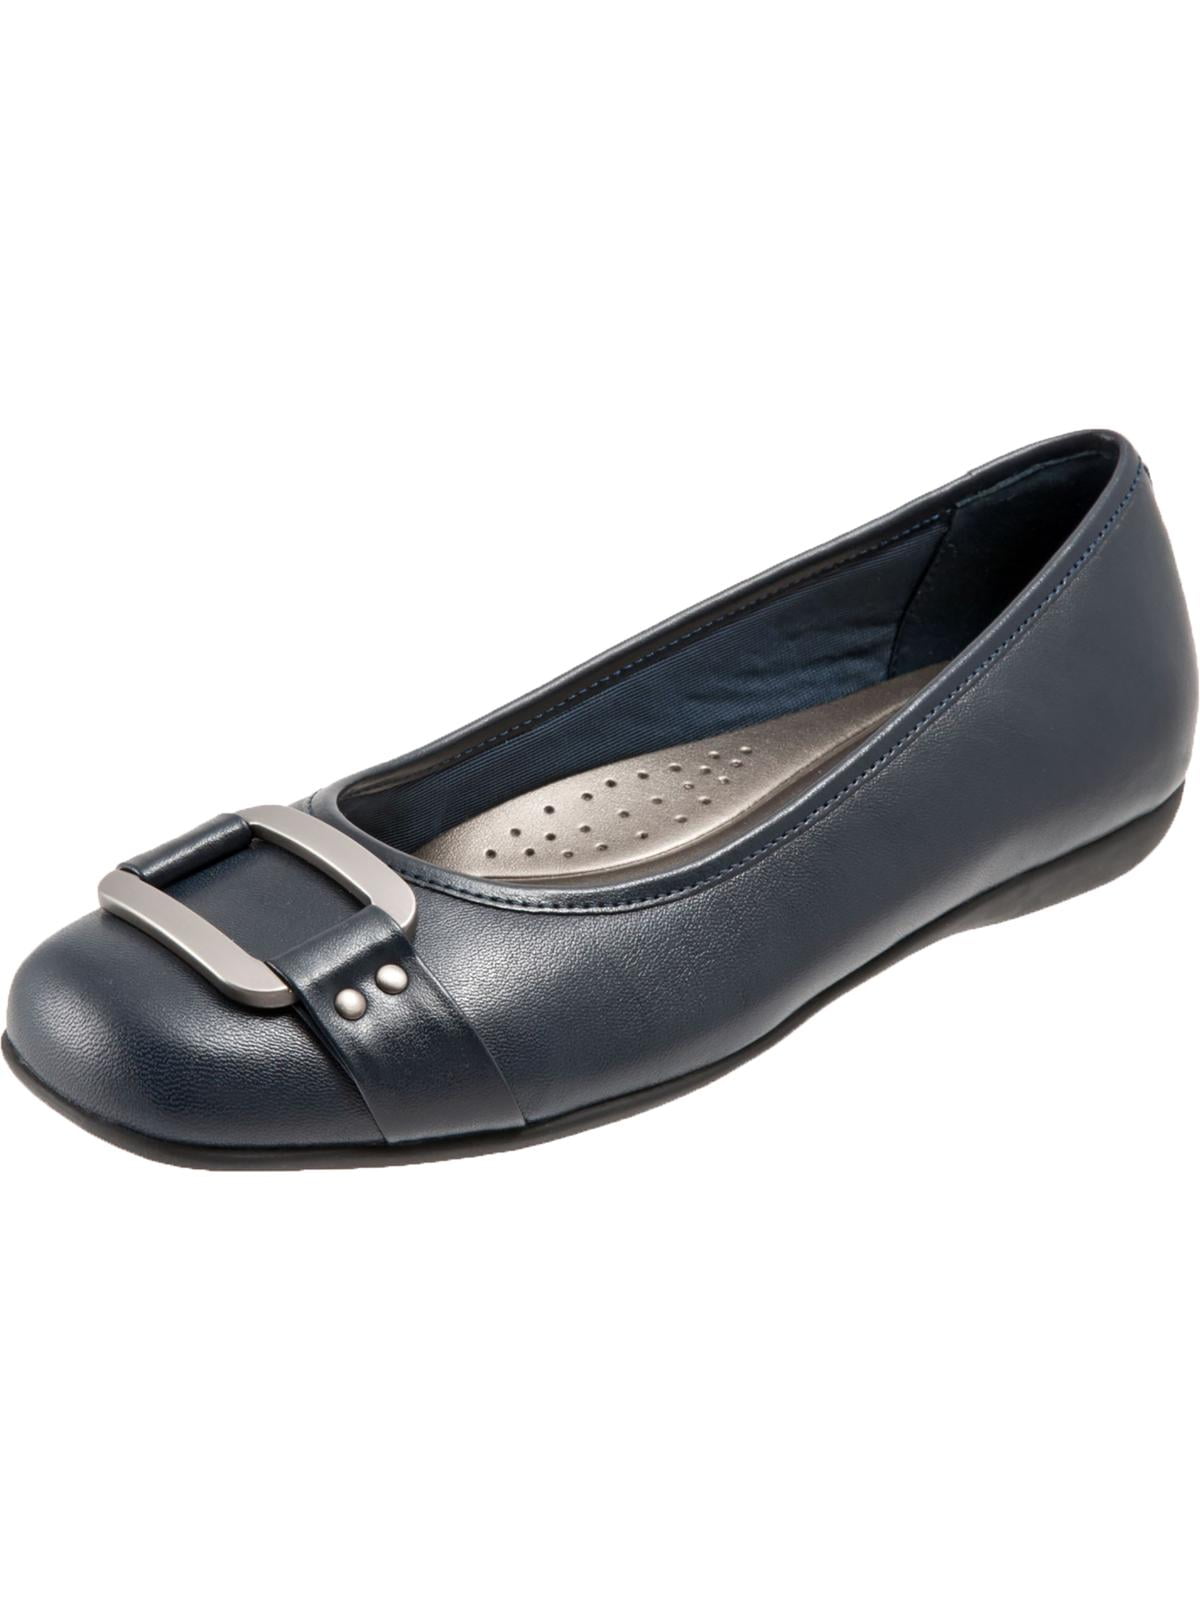 Trotters Womens Sizzle Signature Ballet 